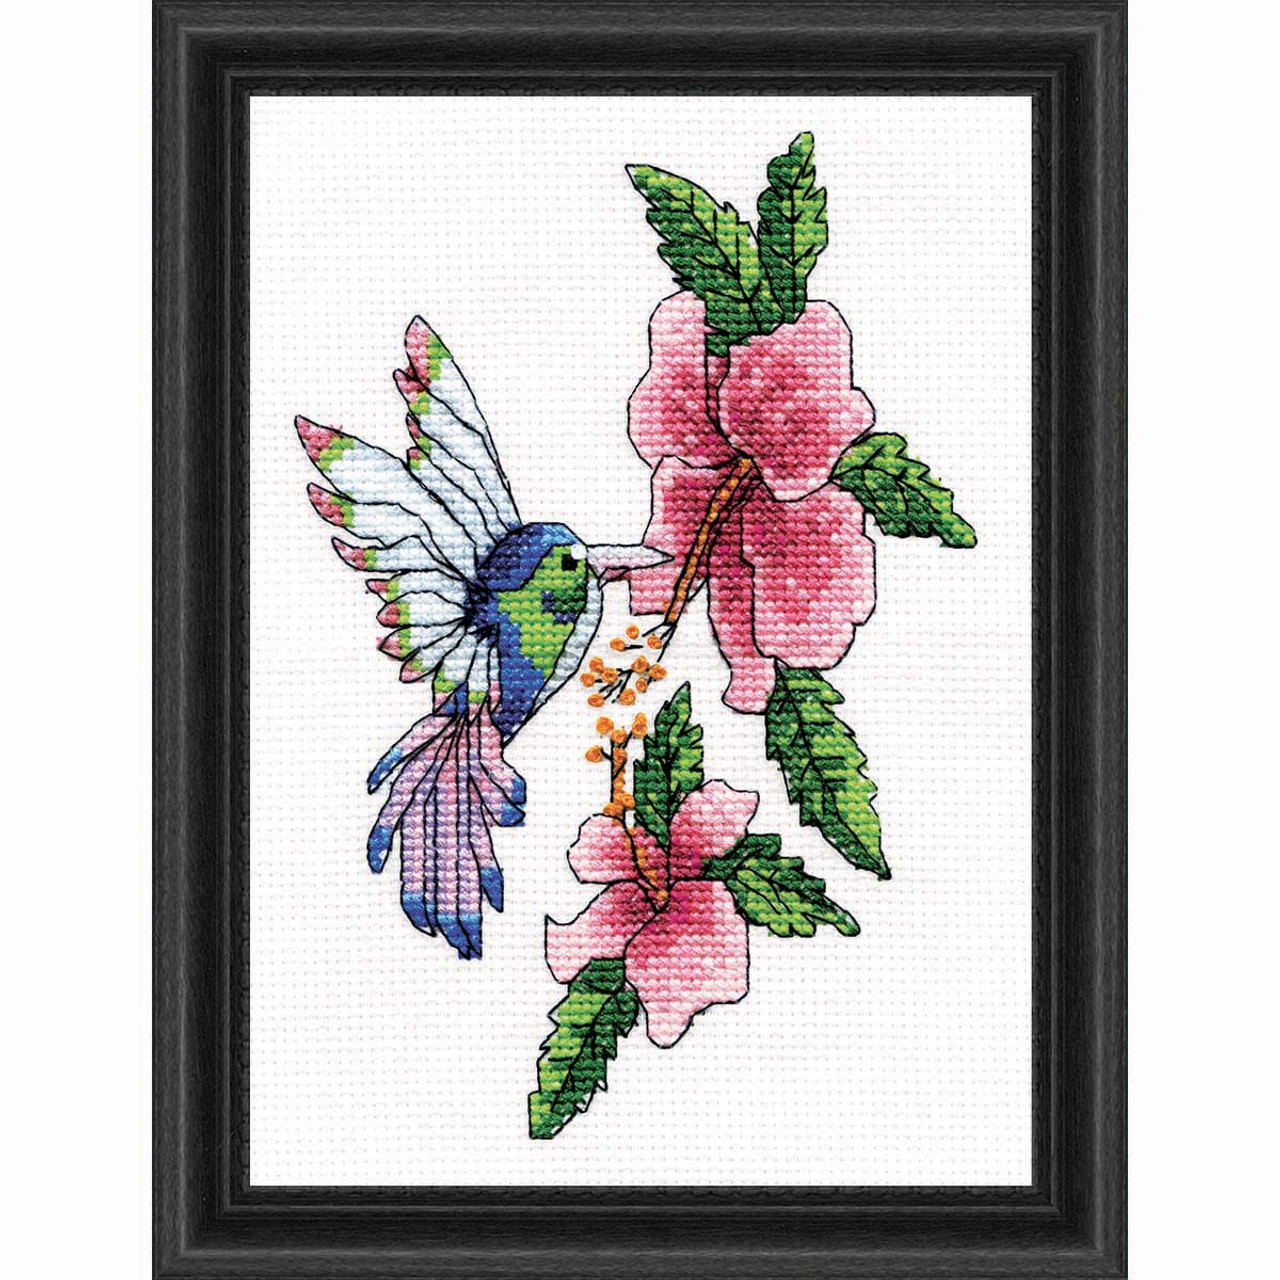 Stamping Cross Stitch Kit, Hummingbird and Flower Counting Cross Stitch Kit  for Adult Beginners, Full Line DIY Cross Stitch Stitching Kit for Home  Decor Cross Stitch Patterns 11.8x15.7 inches AKW019